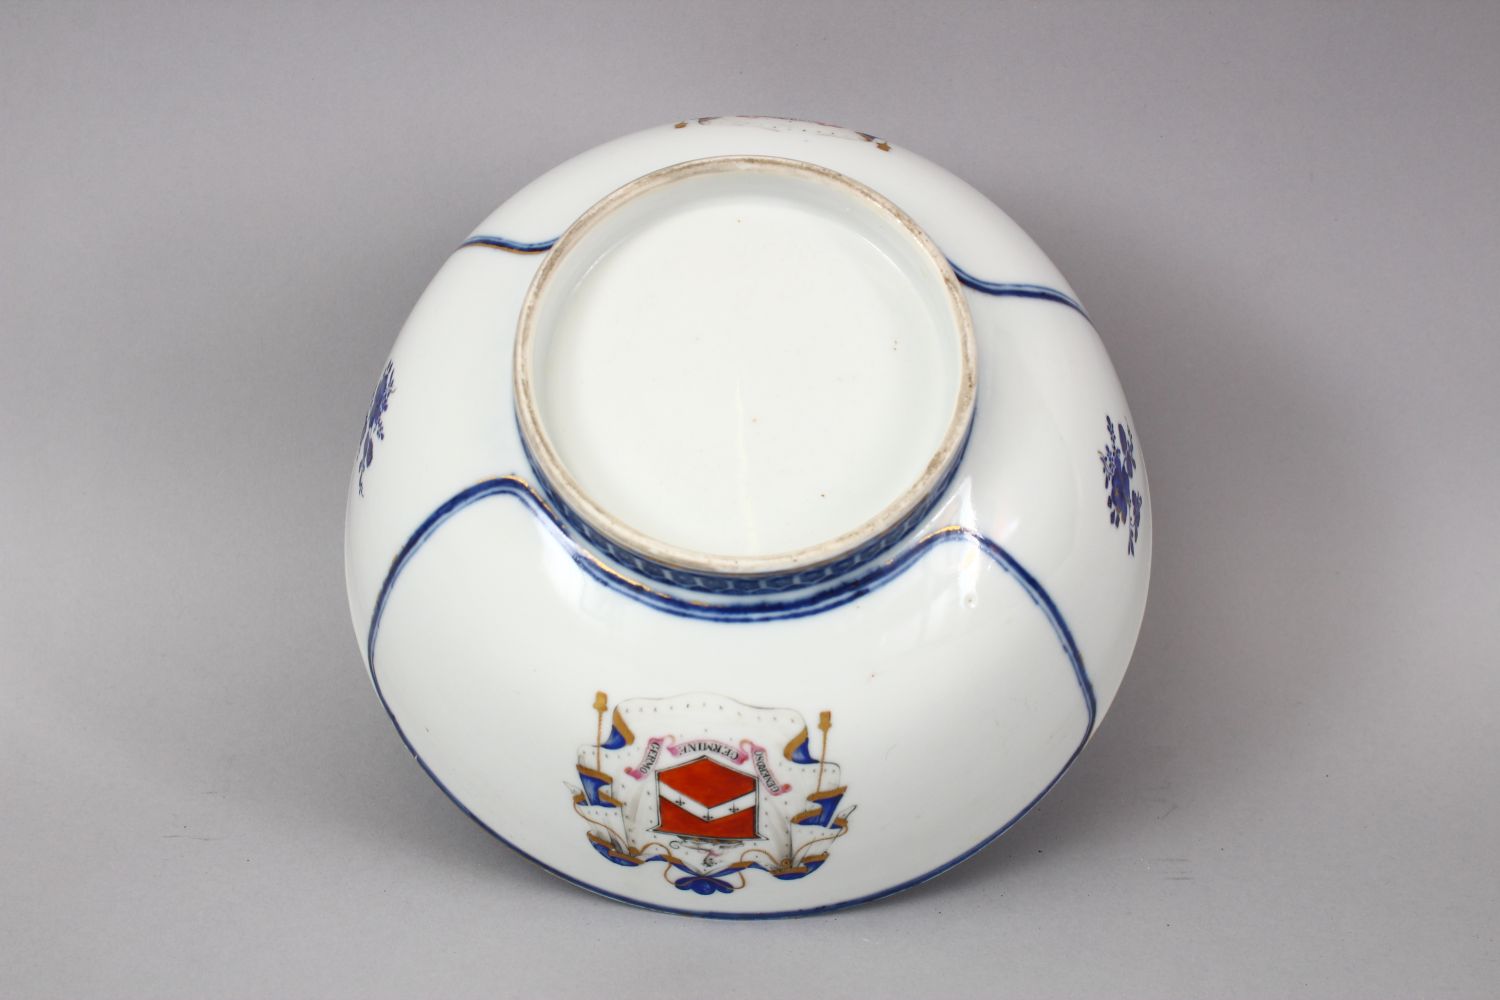 A FINE 18TH CENTURY CHINESE QIANLONG ARMORIAL PORCELAIN BOWL, the bowl with a finely painted band of - Image 6 of 6